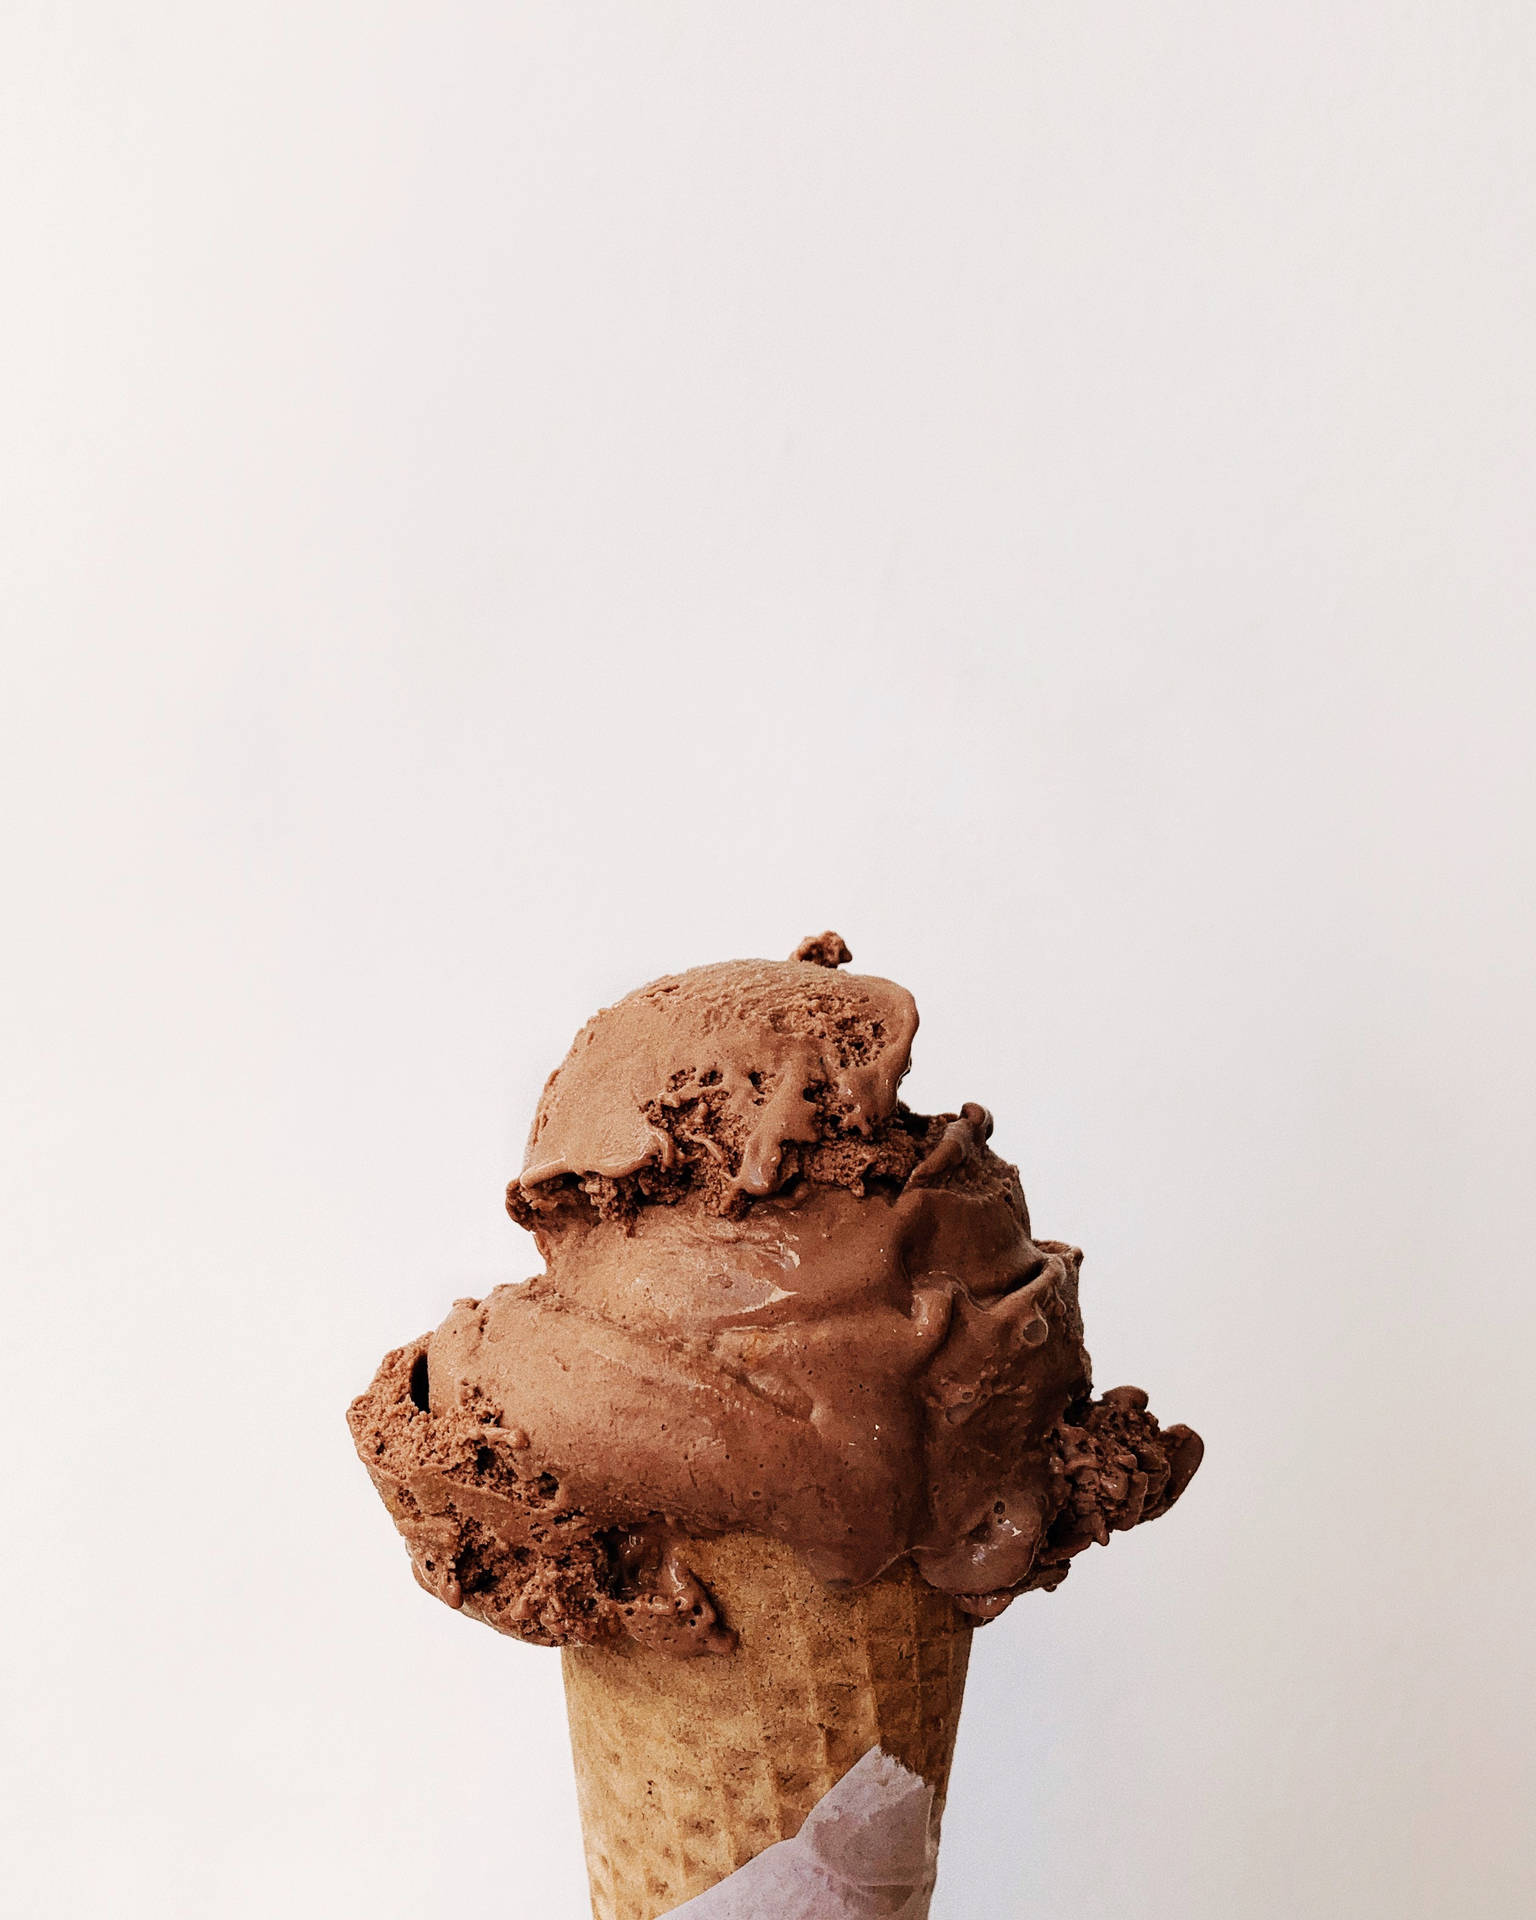 Mouthwatering Chocolate Ice Cream Wallpaper